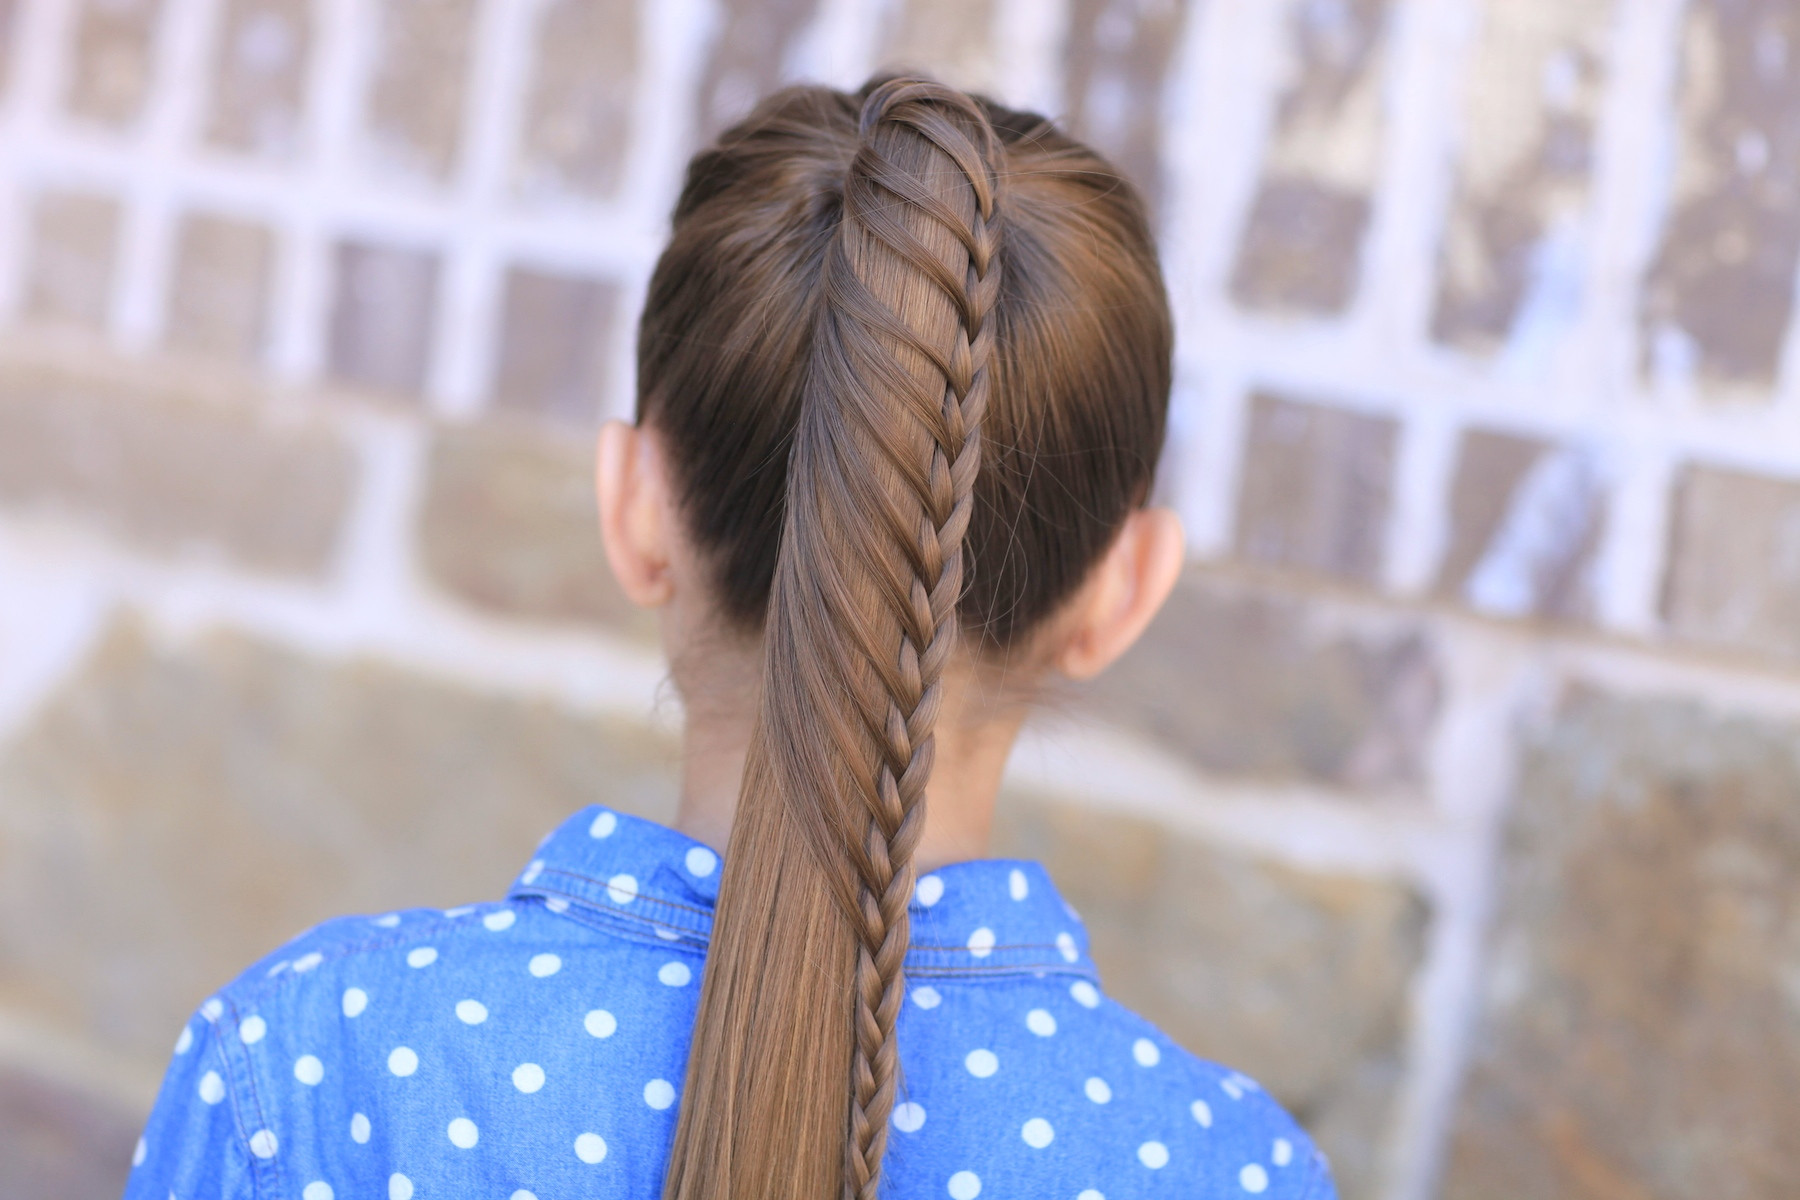 Hairstyles For 9 Year Olds Girl
 All you wanted to know about Hairstyles for 9 year old